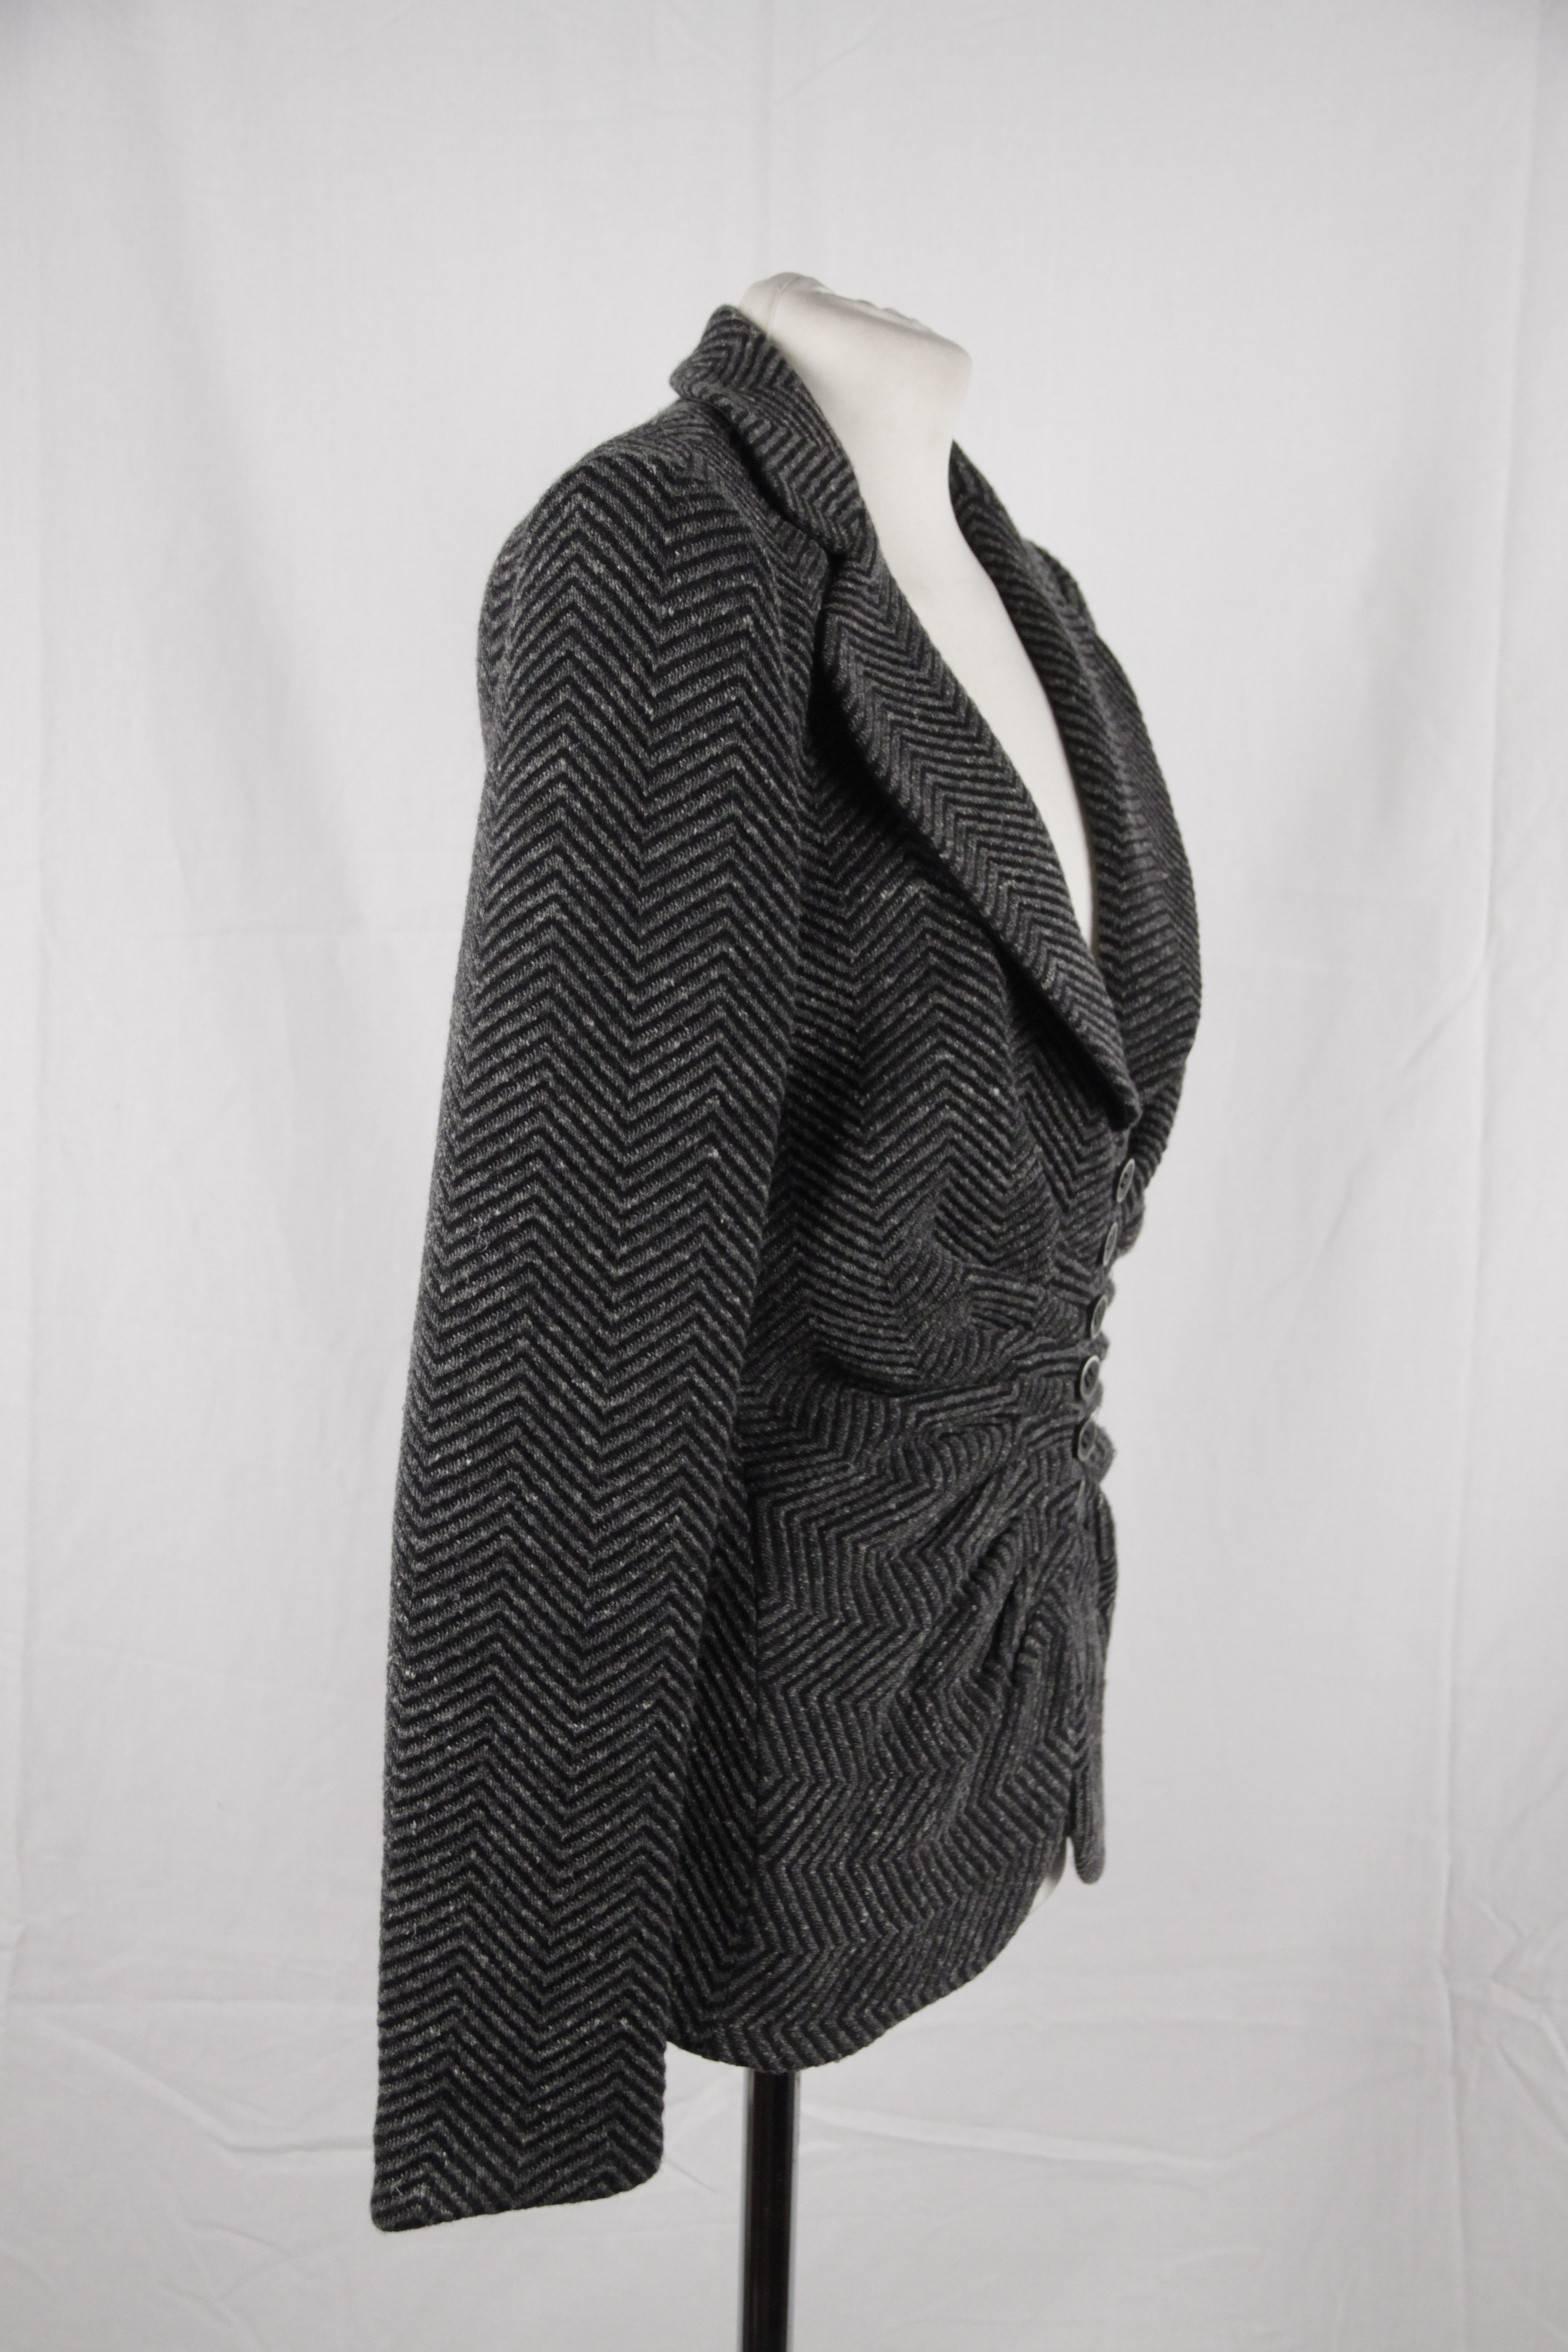 ARMANI COLLEZIONI Gray Textured Wool Blend BLAZER Jacket w/ DRAPING Size 44 In Good Condition In Rome, Rome